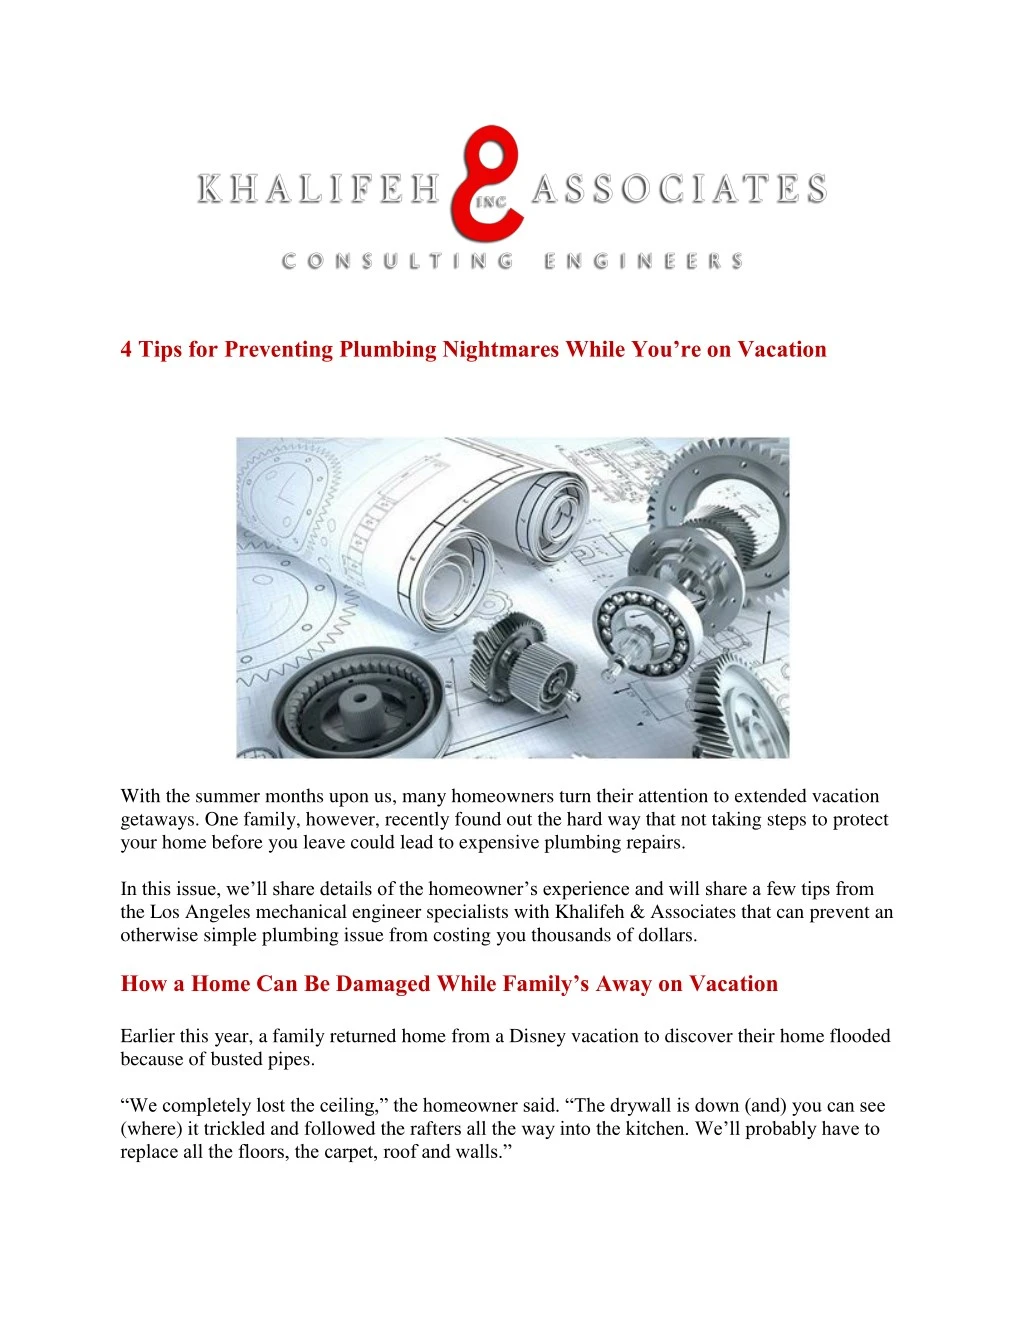 4 tips for preventing plumbing nightmares while